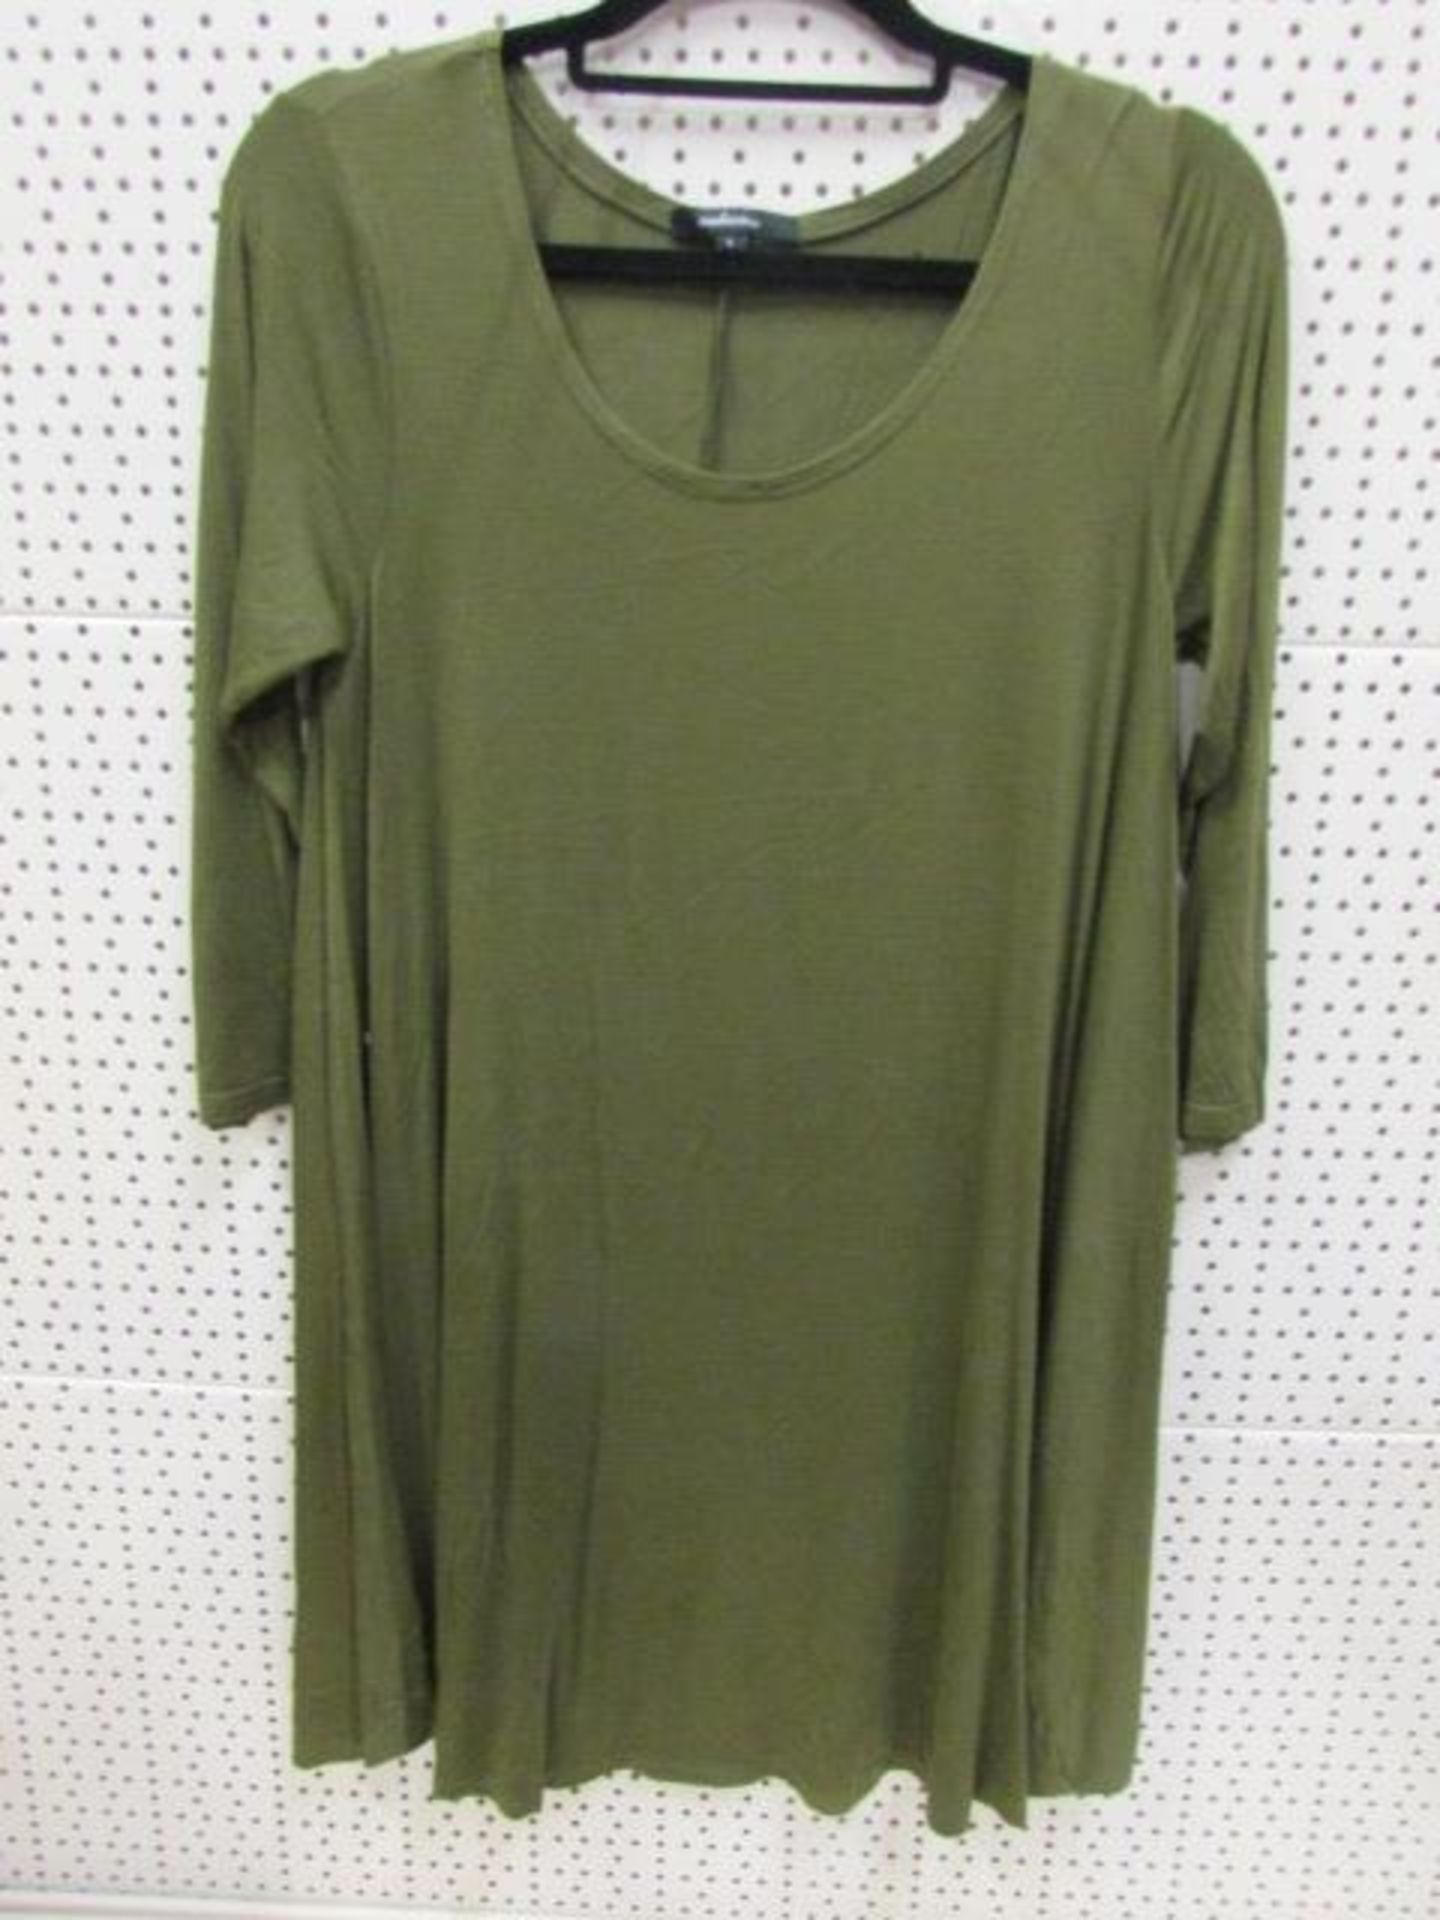 Brand New With Tags Ladies Top Sourced From Zulily (Us Size: L)